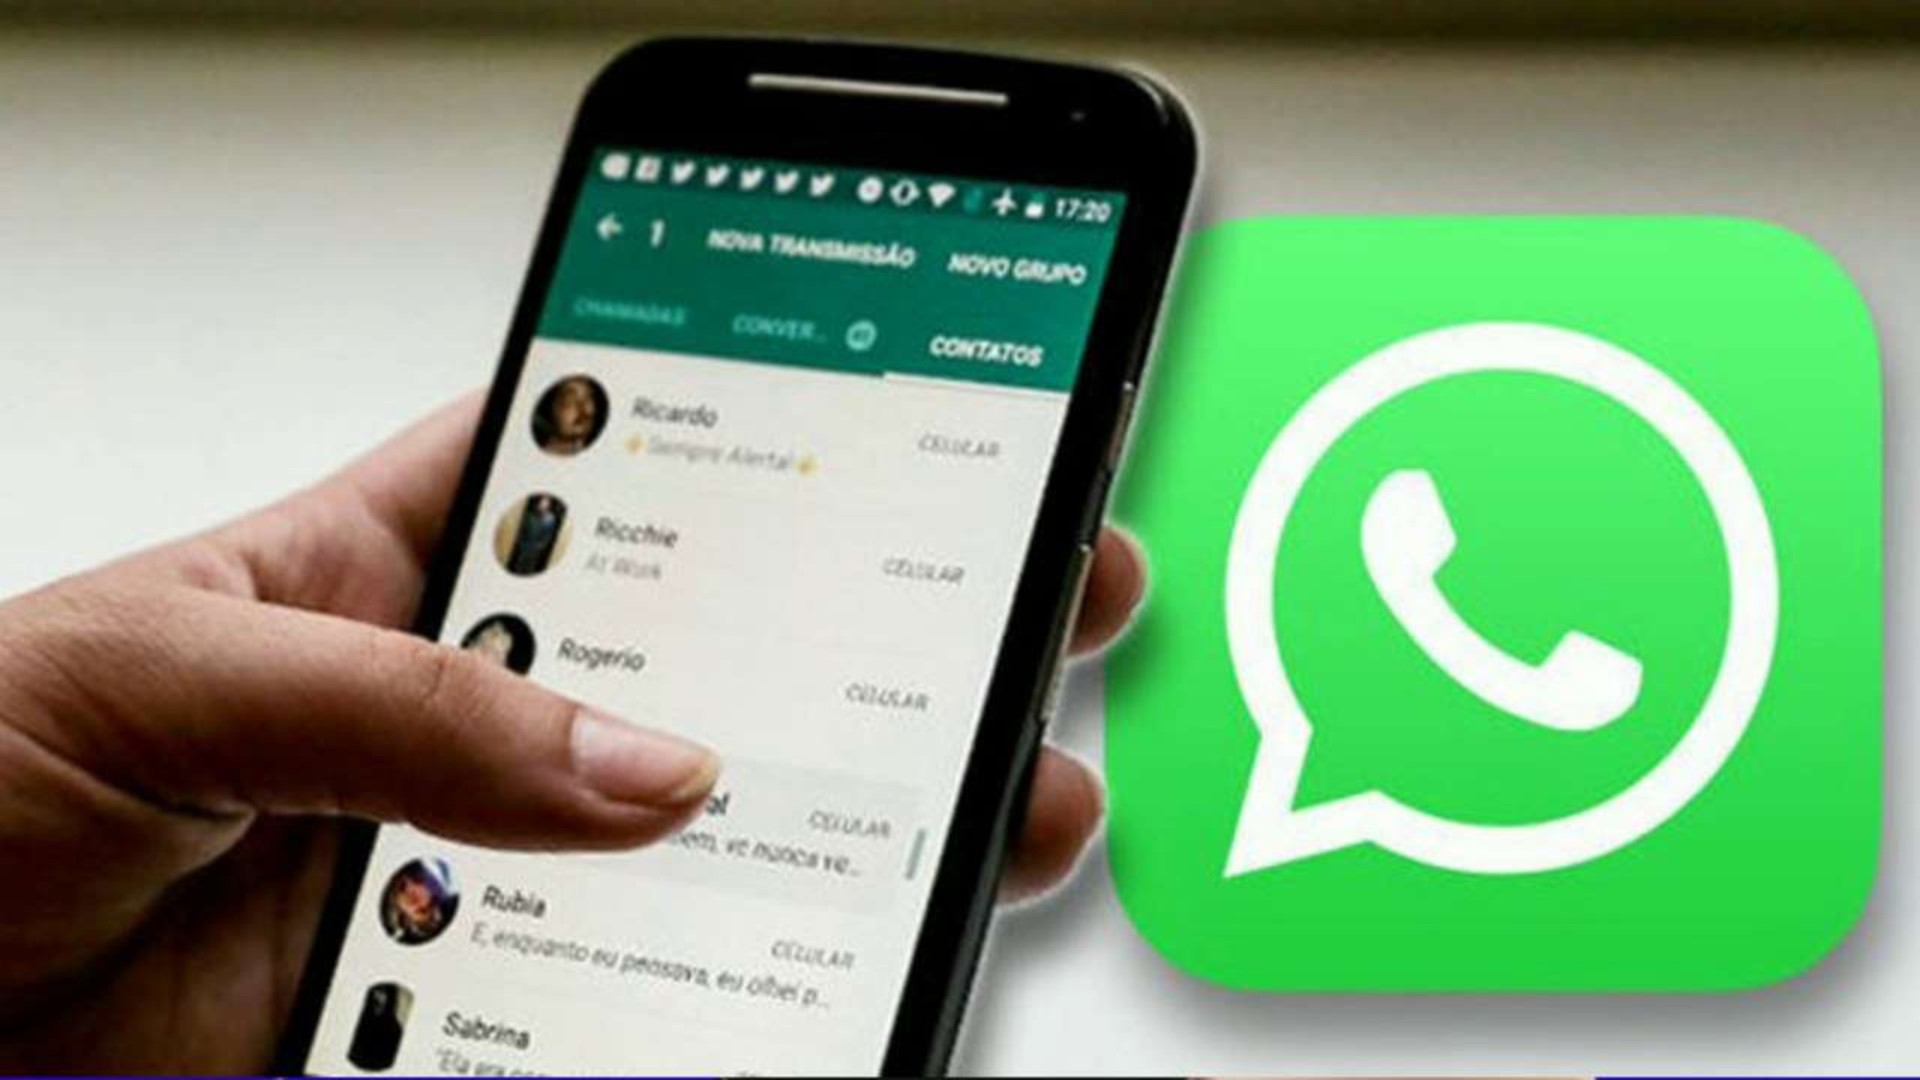 Tired Of WhatsApp? Here’s How To Disappear From It Without Deleting